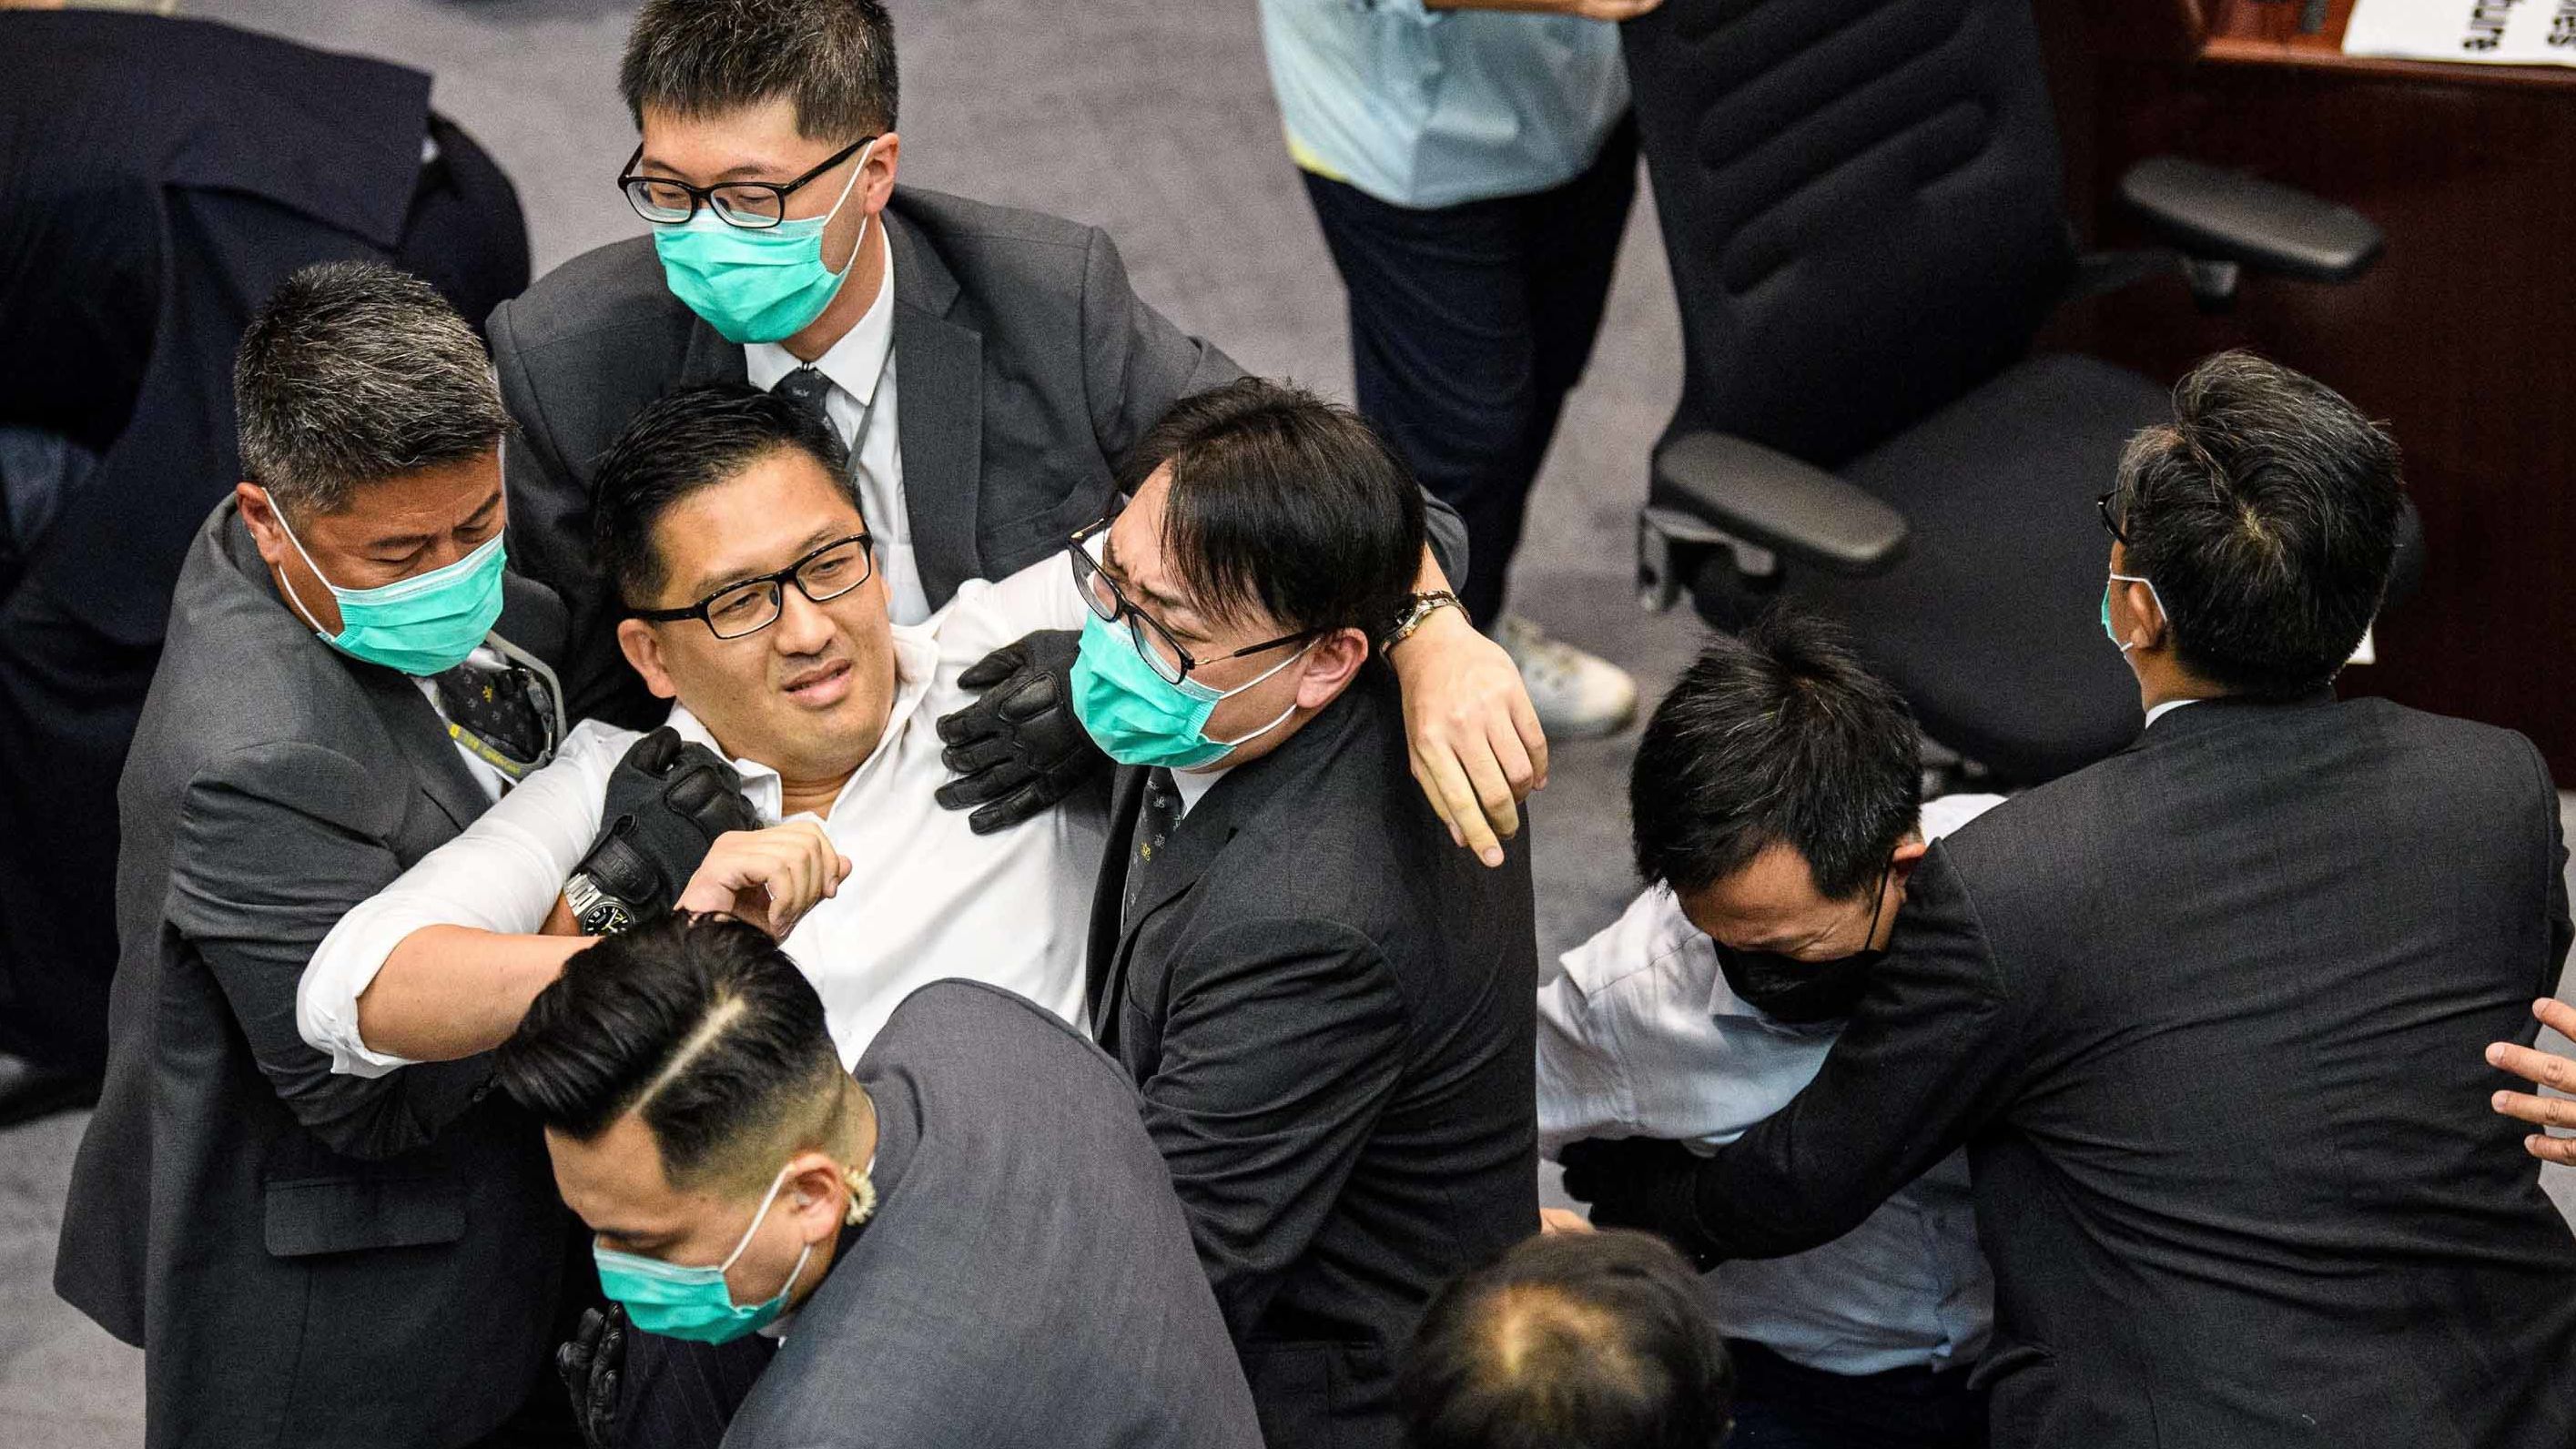 Lam Cheuk-ting is removed by security personnel following the scuffle.